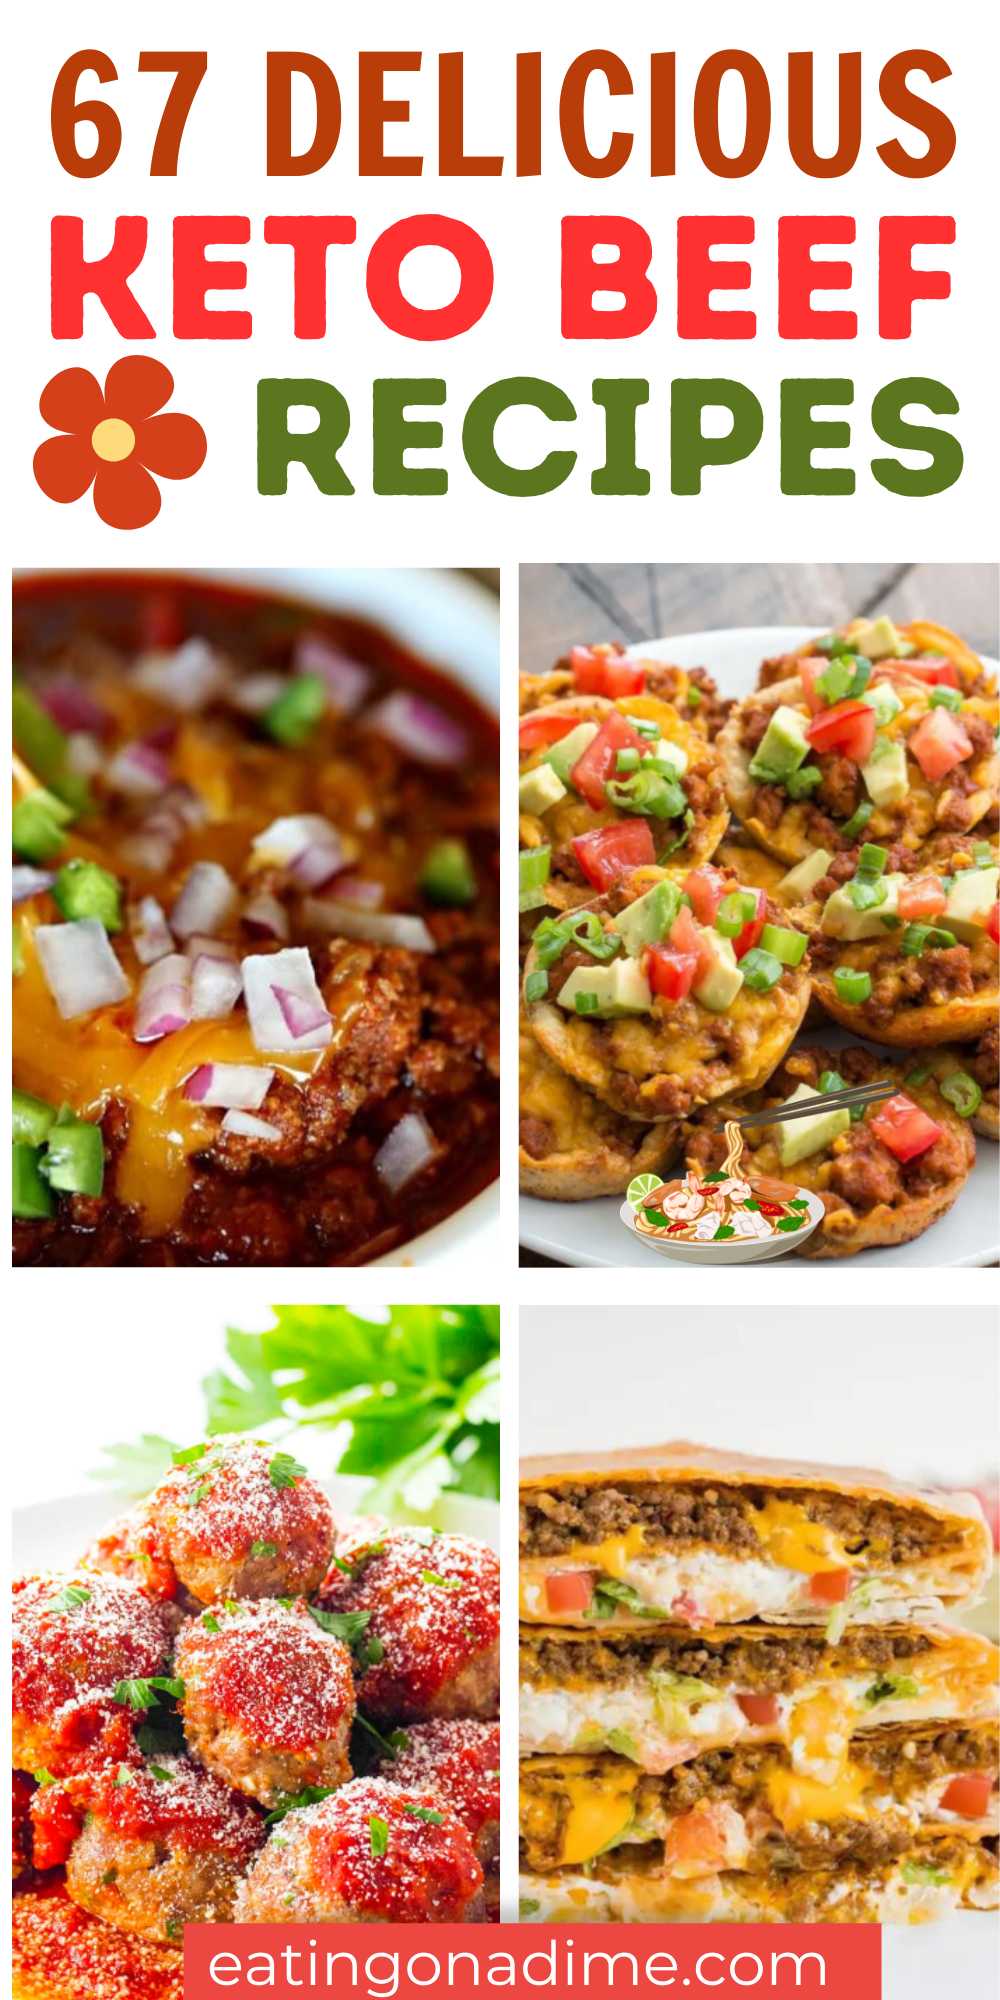 If you are looking for some new Keto Beef Recipes, then you have come to the right place. These recipes are delicious and easy to make. From sizzling steaks to savory stews. These low-carb beef recipes will have your taste buds dancing and your waistline thanking you. Get ready for a carnivorous adventure. #eatingonadime #ketobeefrecipes #ketorecipes